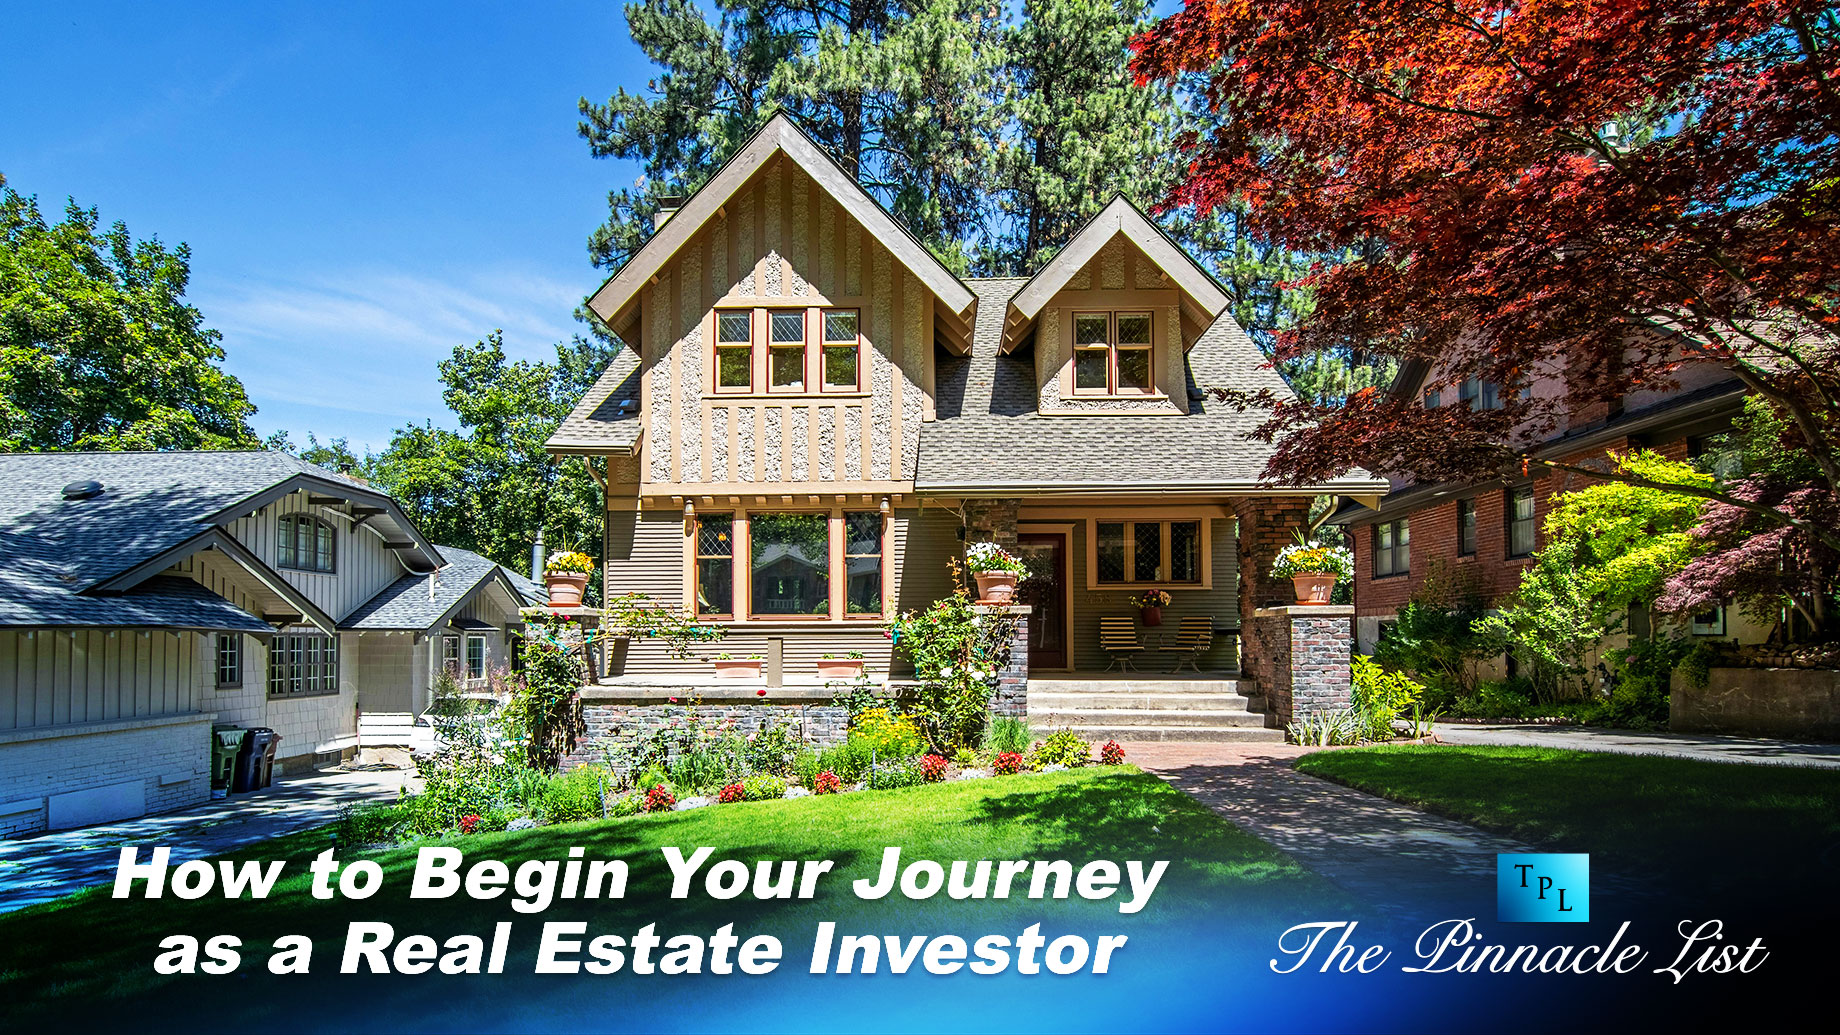 How to Begin Your Journey as a Real Estate Investor